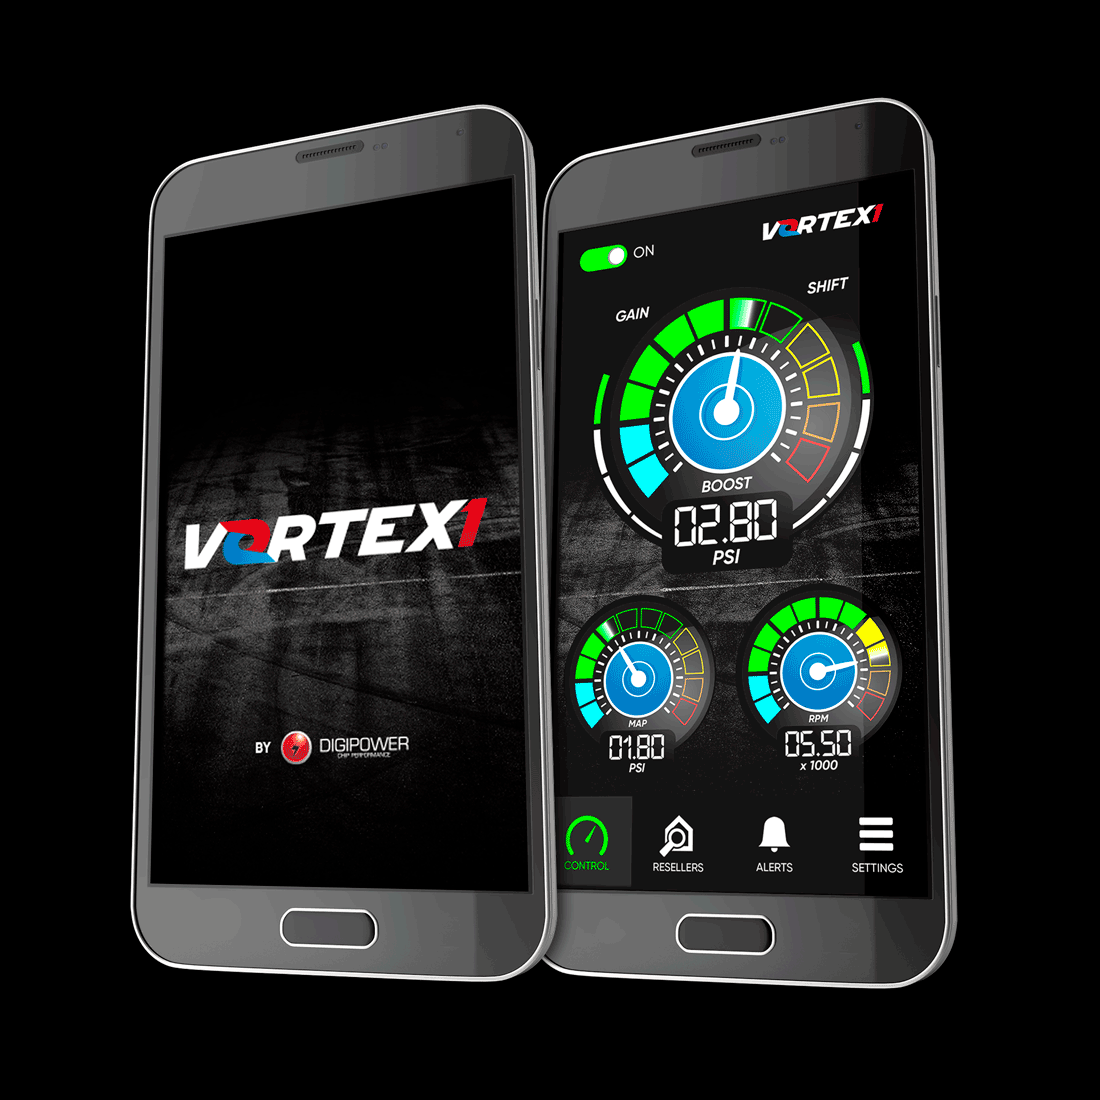 VORTEX1 Turbo Performance Tuner for Ford F150 Ecoboost 2.7